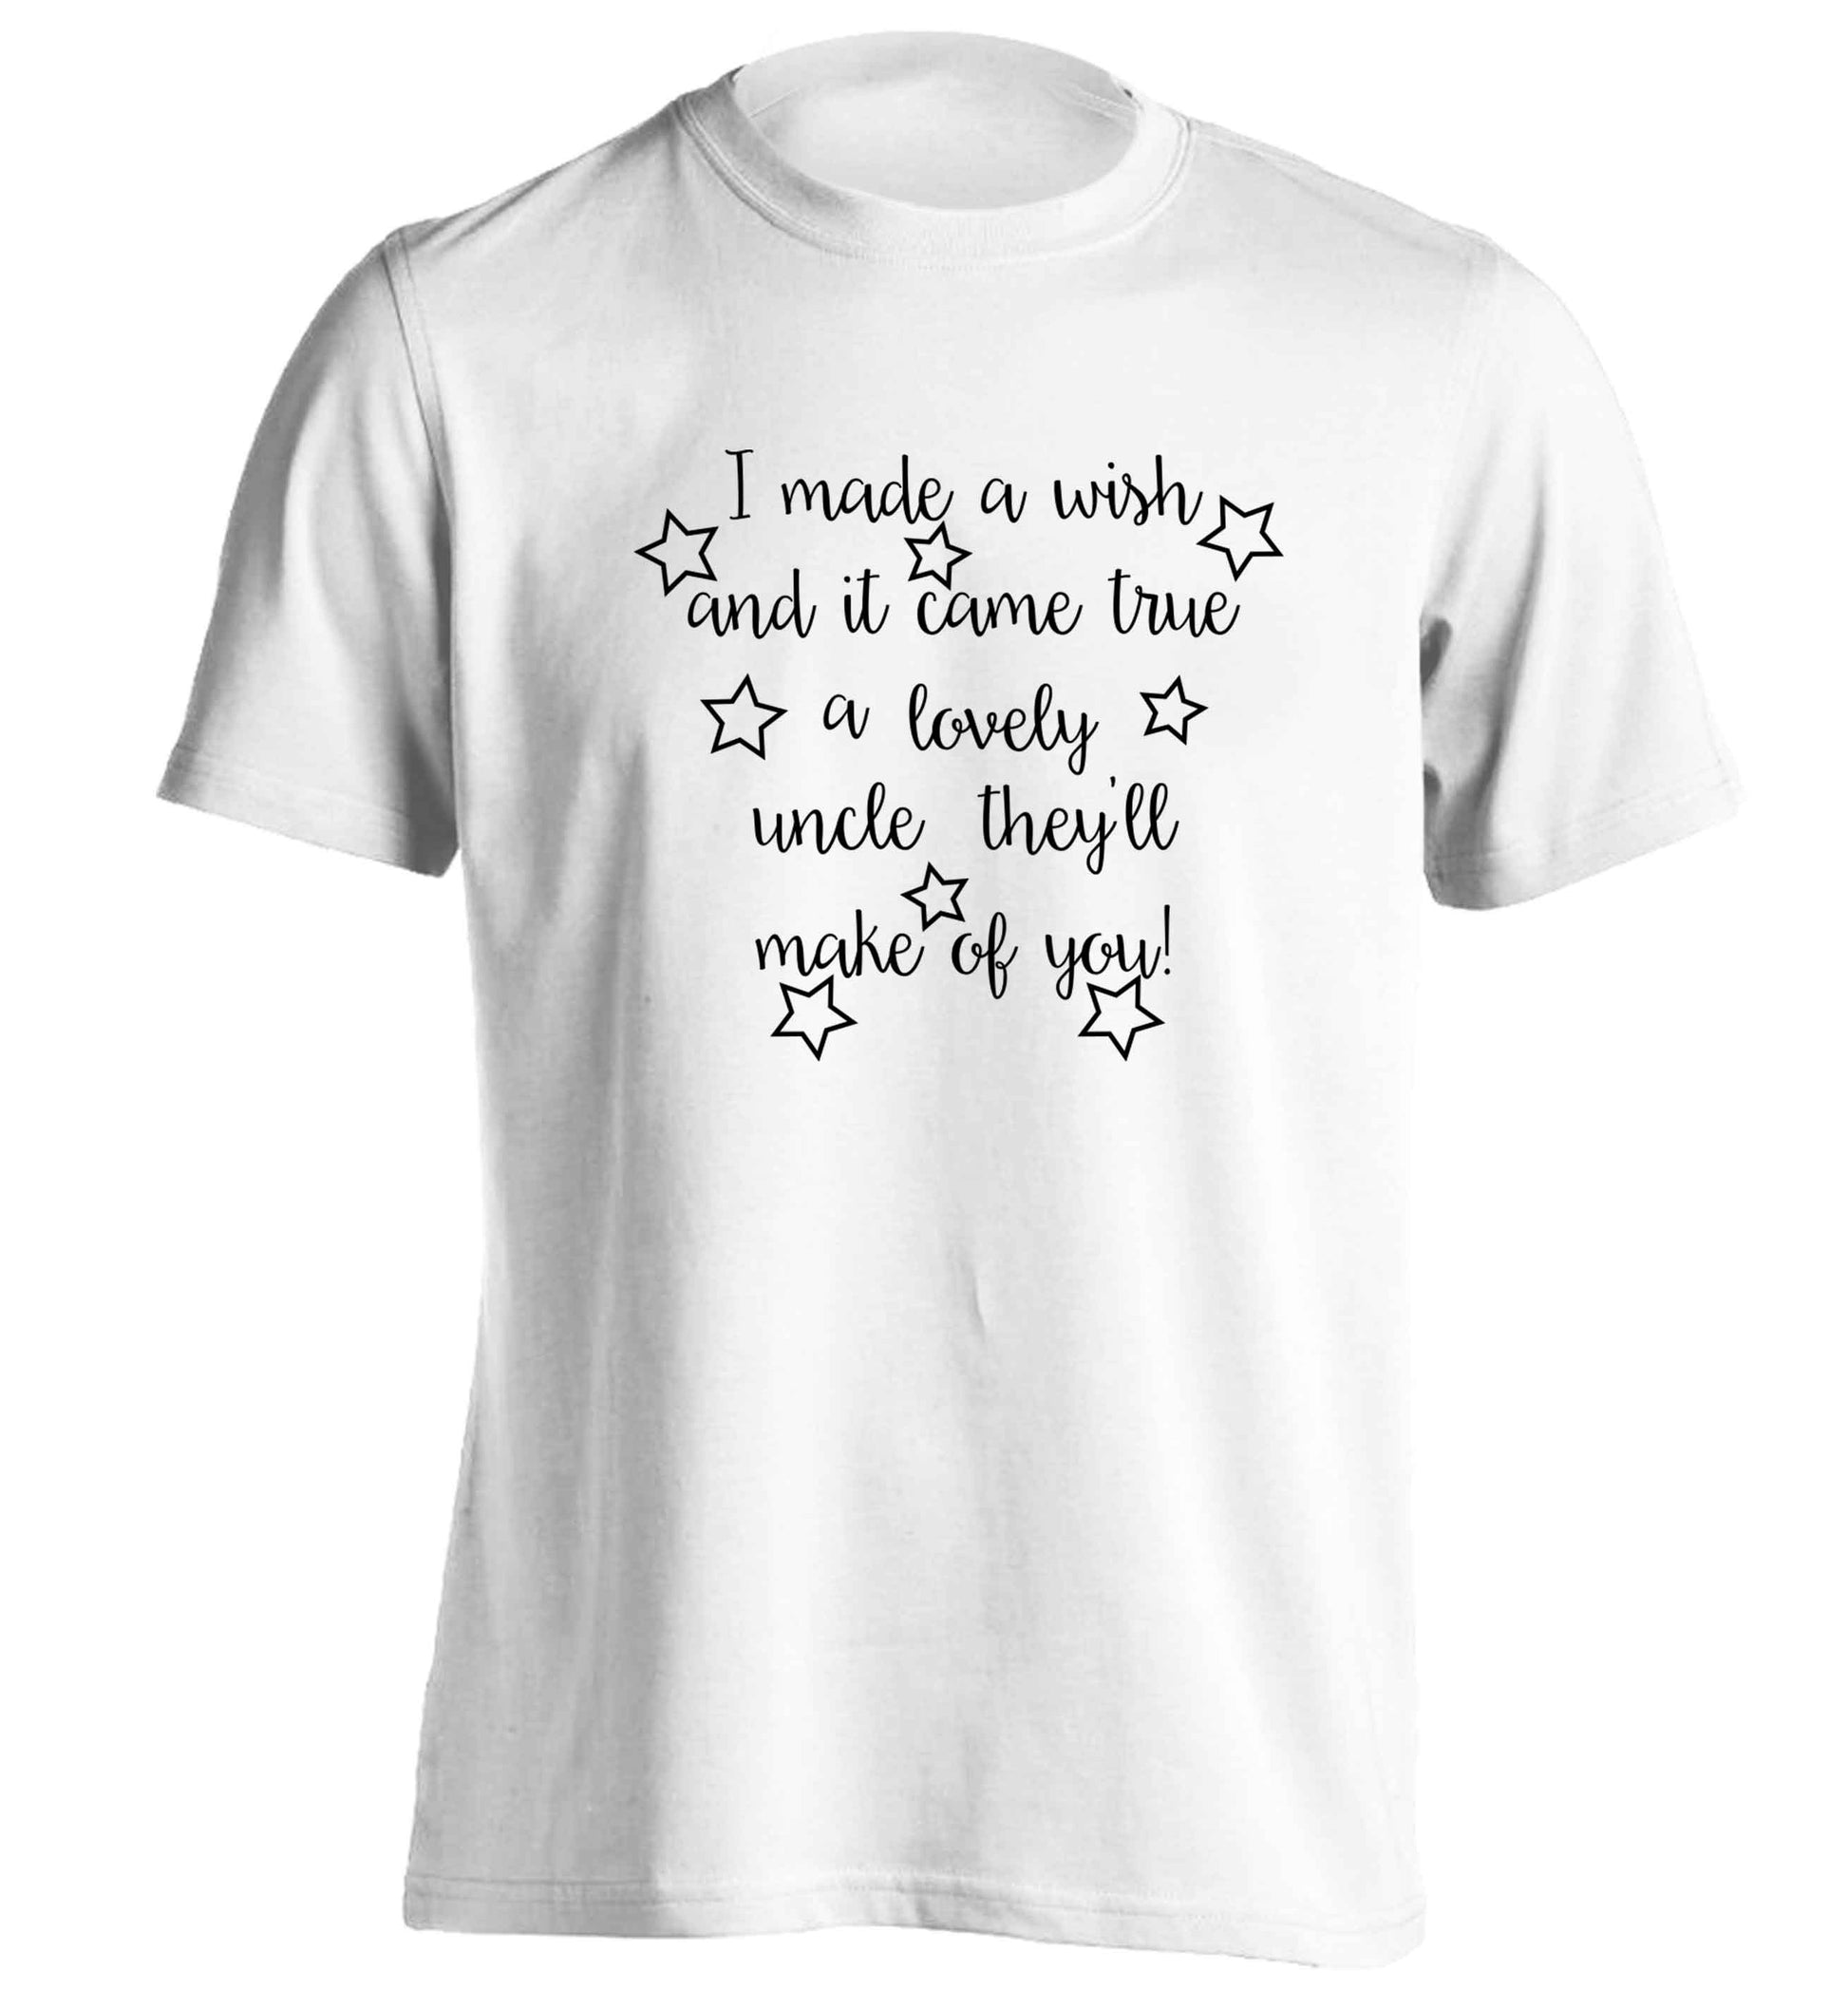 I made a wish and it came true a lovely uncle they'll make of you! adults unisex white Tshirt 2XL